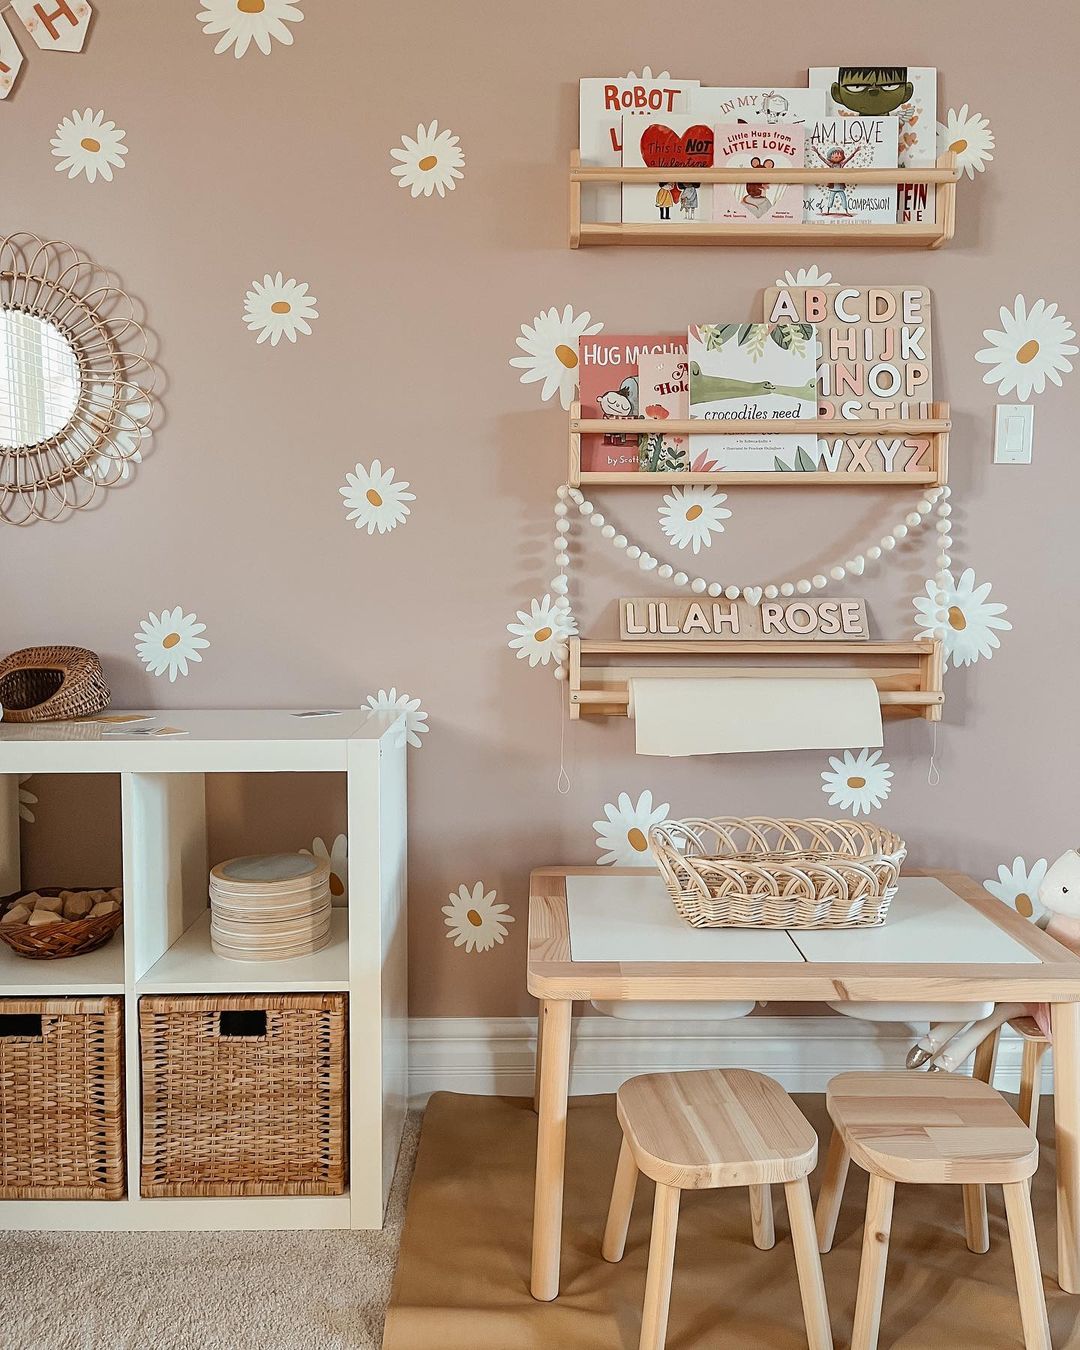 How to Design a Playful and Practical Playroom for Kids